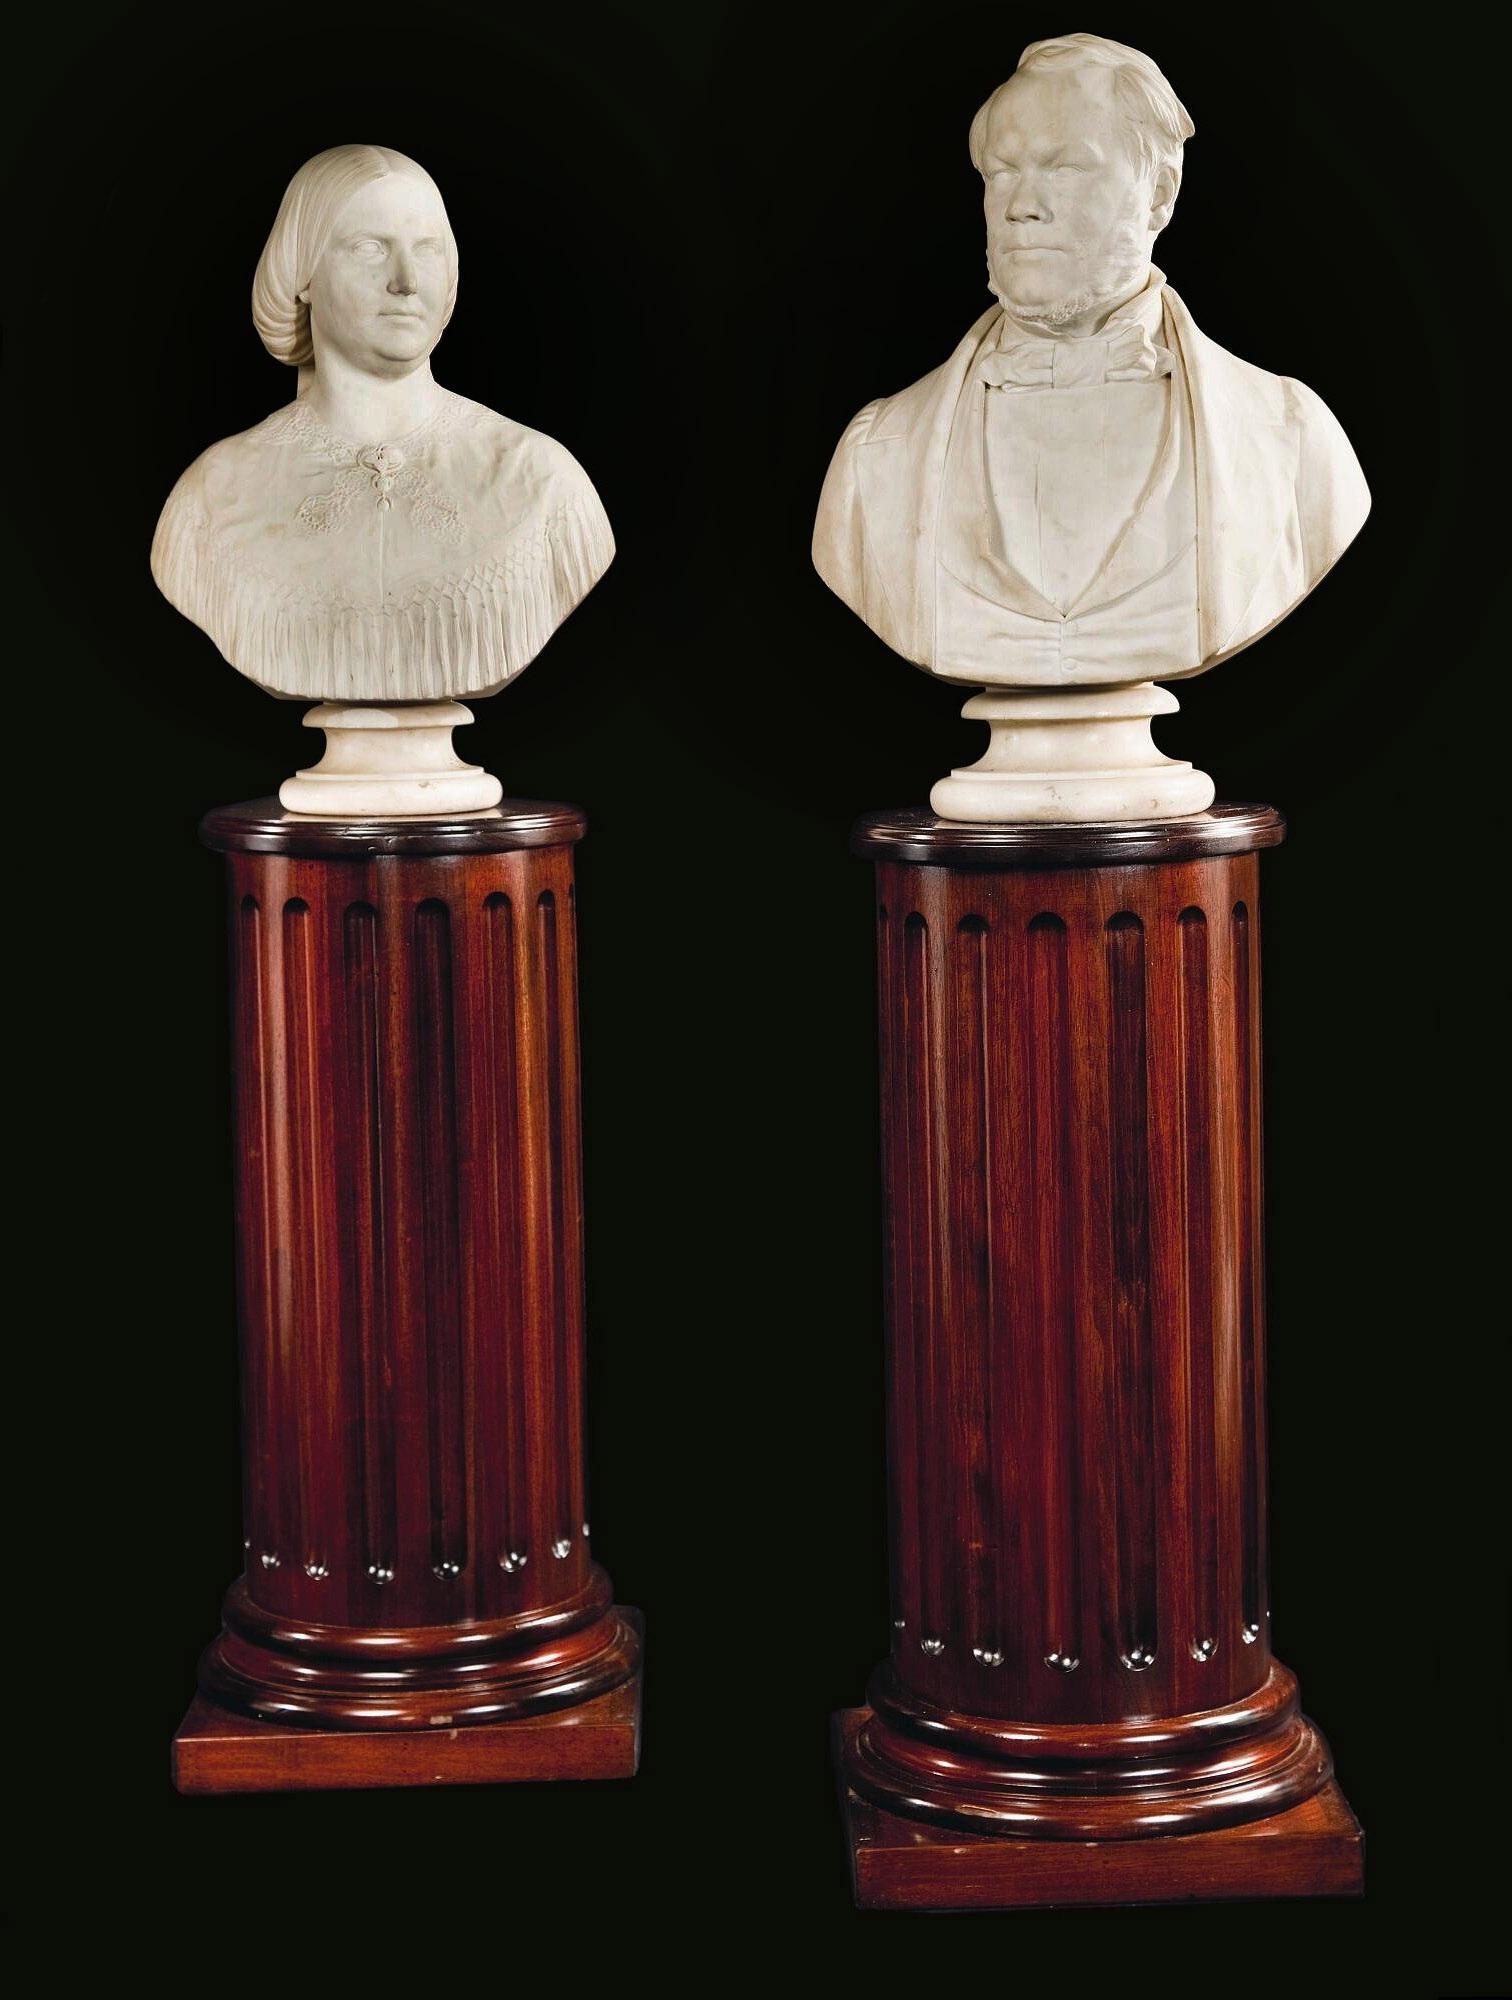 A Fine Pair of Mid 19th Century English Carved Carrara Marble Busts on Wooden Pedestals By John Denton Crittenden

Depicting a well-to-do man and woman.

Each signed J.D. CRITTENDEN. SC and dated 1860.

John Denton Crittenden (1834-1877) was a